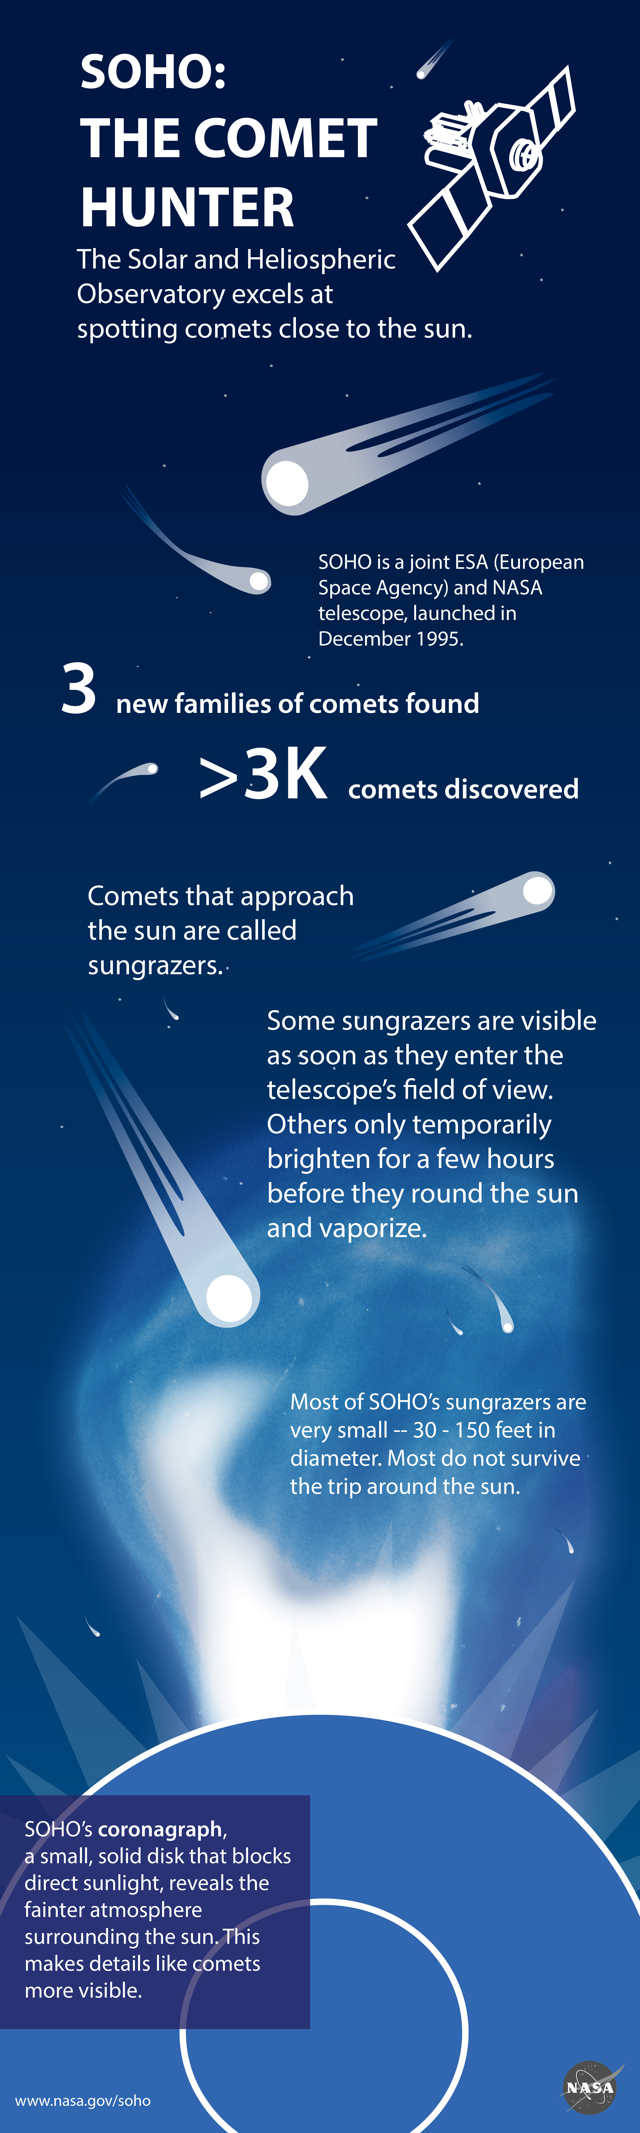 3,000th Comet spotted by SOHO (2)